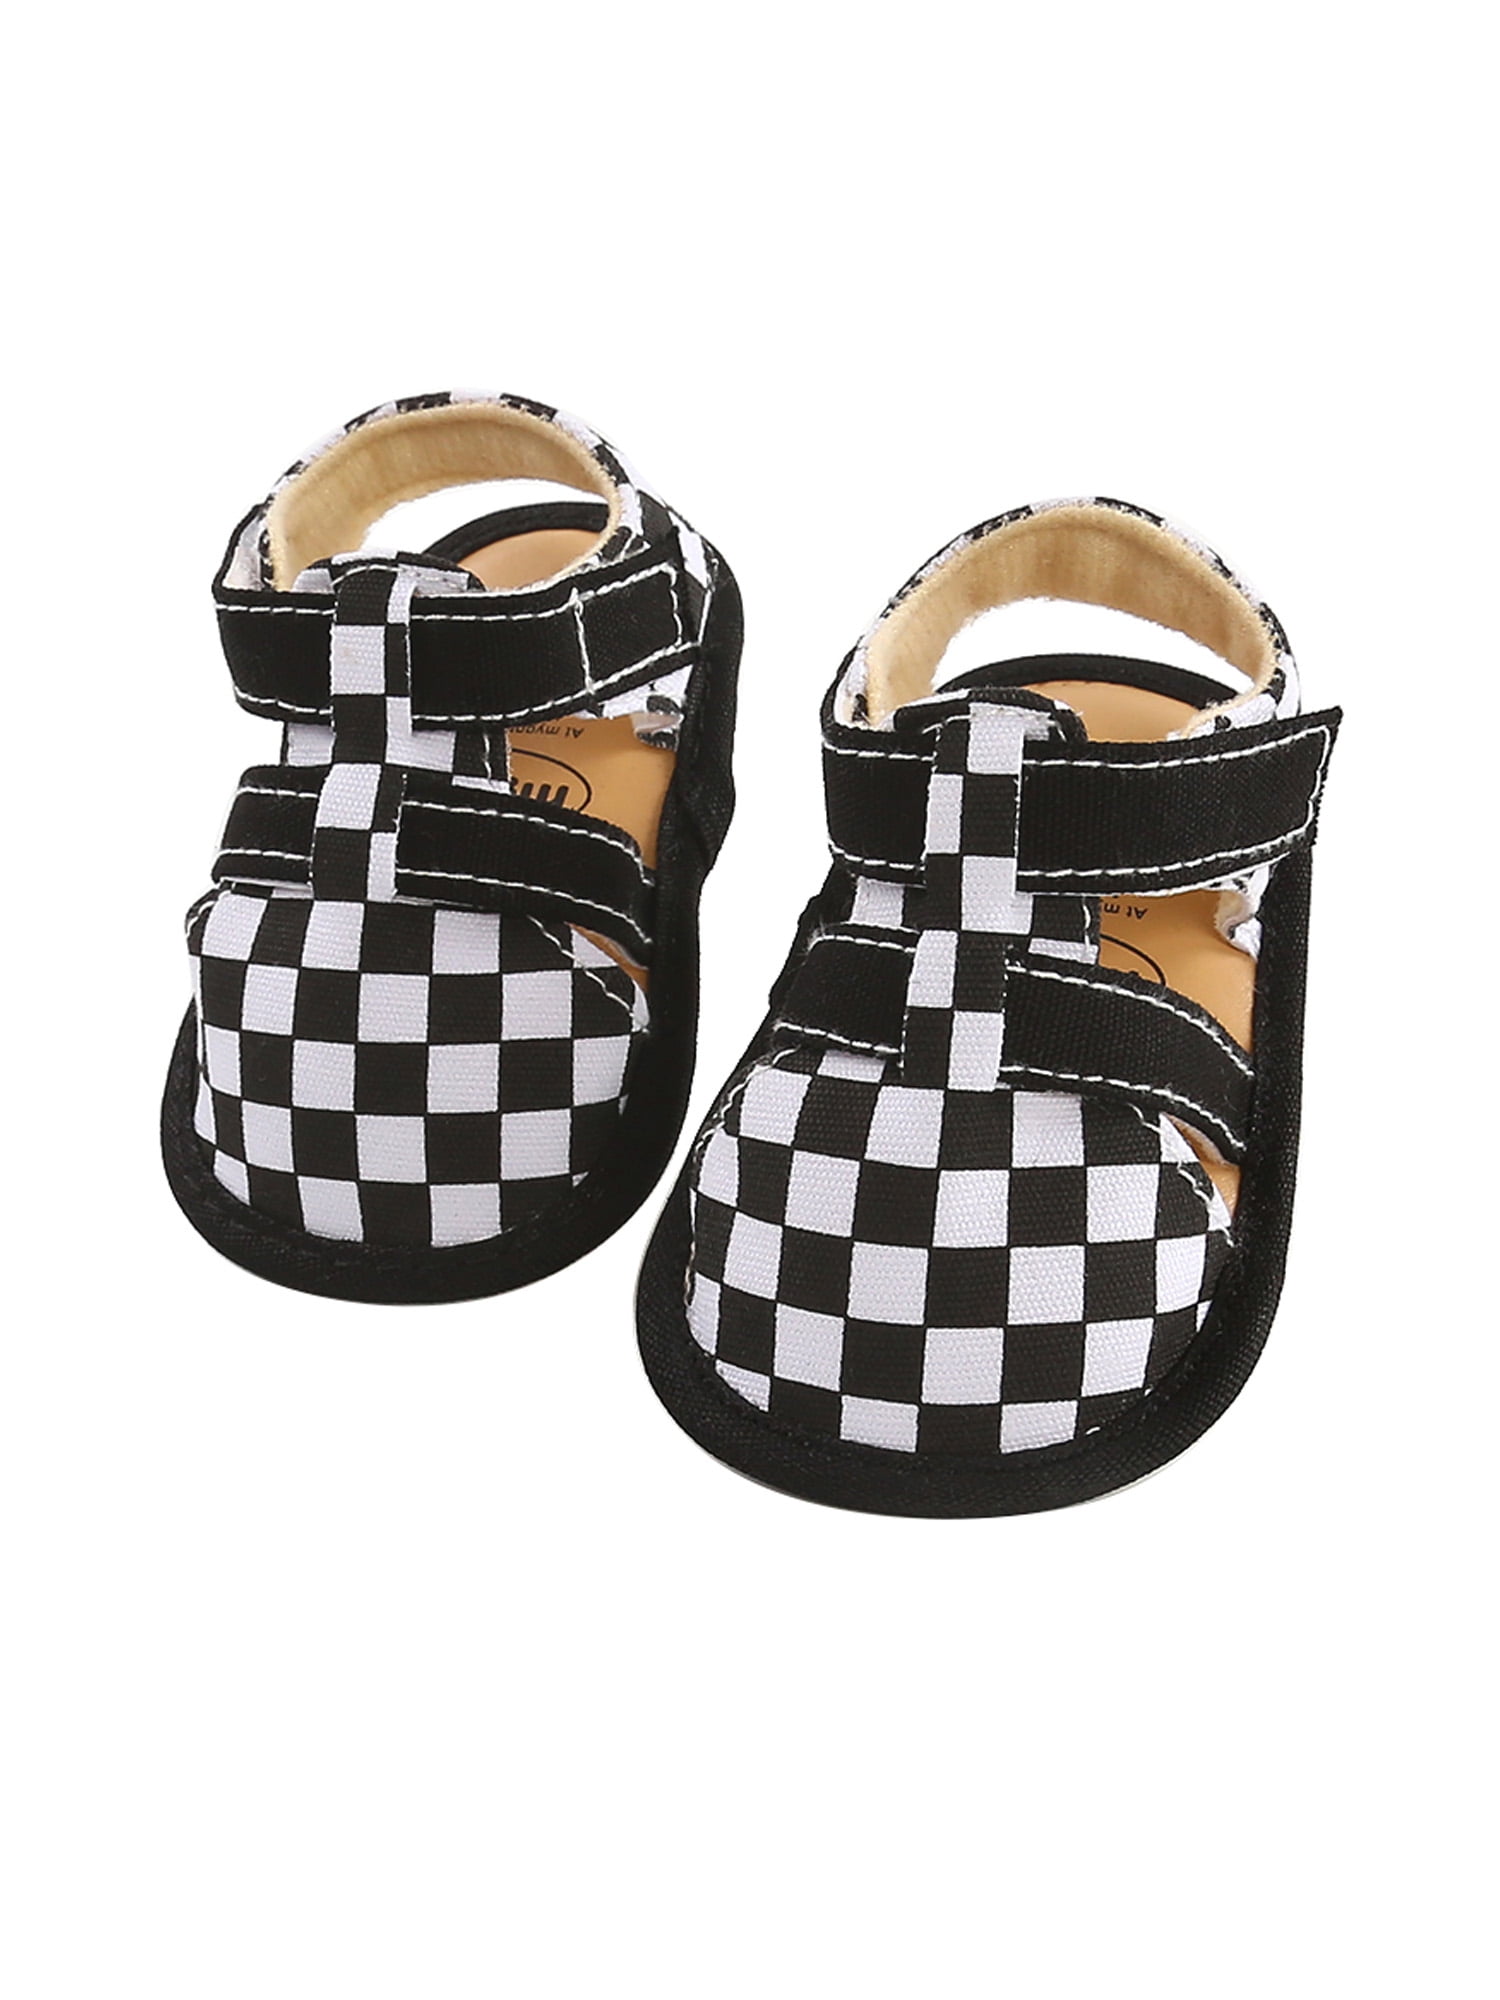 Baby Boy Black White Checkered Slip On Shoes  0-6 6-12 12-18 Months